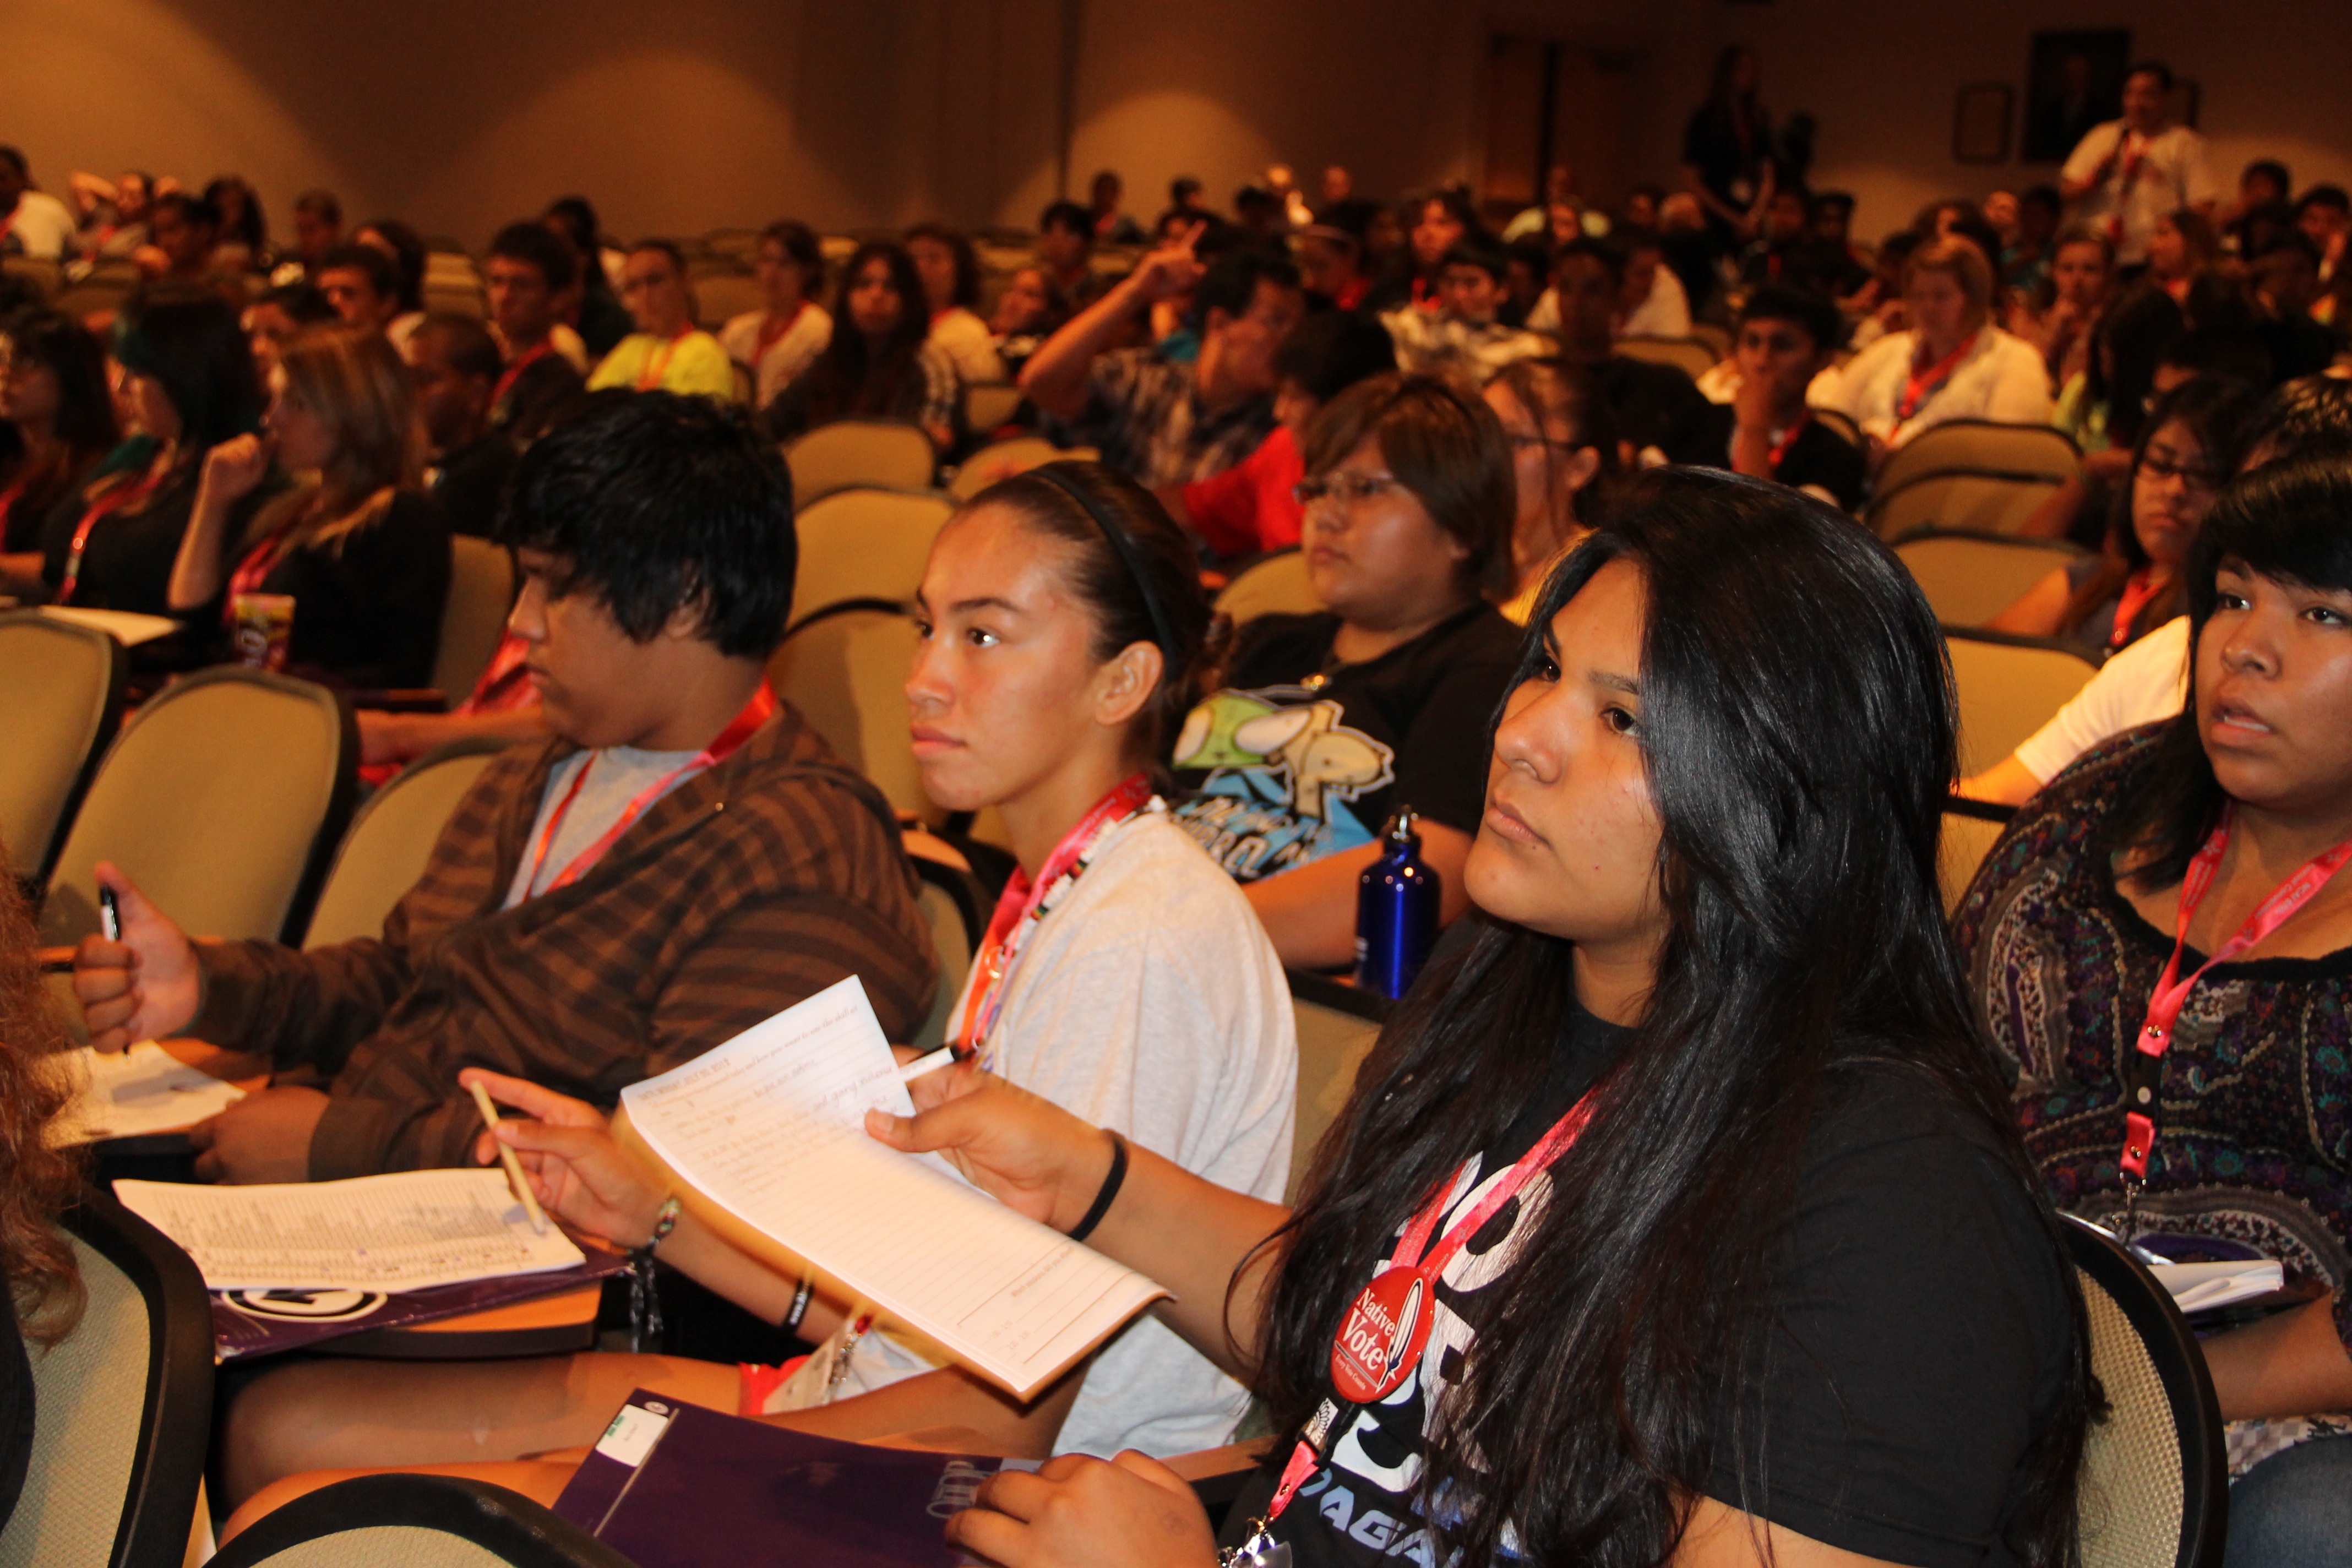  About 200 teens and adult chaperones representing 53 American Indian tribes across 22 states are in the Washington, D.C. area for a week-long dialogue with their peers and officials from the U.S. Departments of Justice, Education, and Health and Human Services.